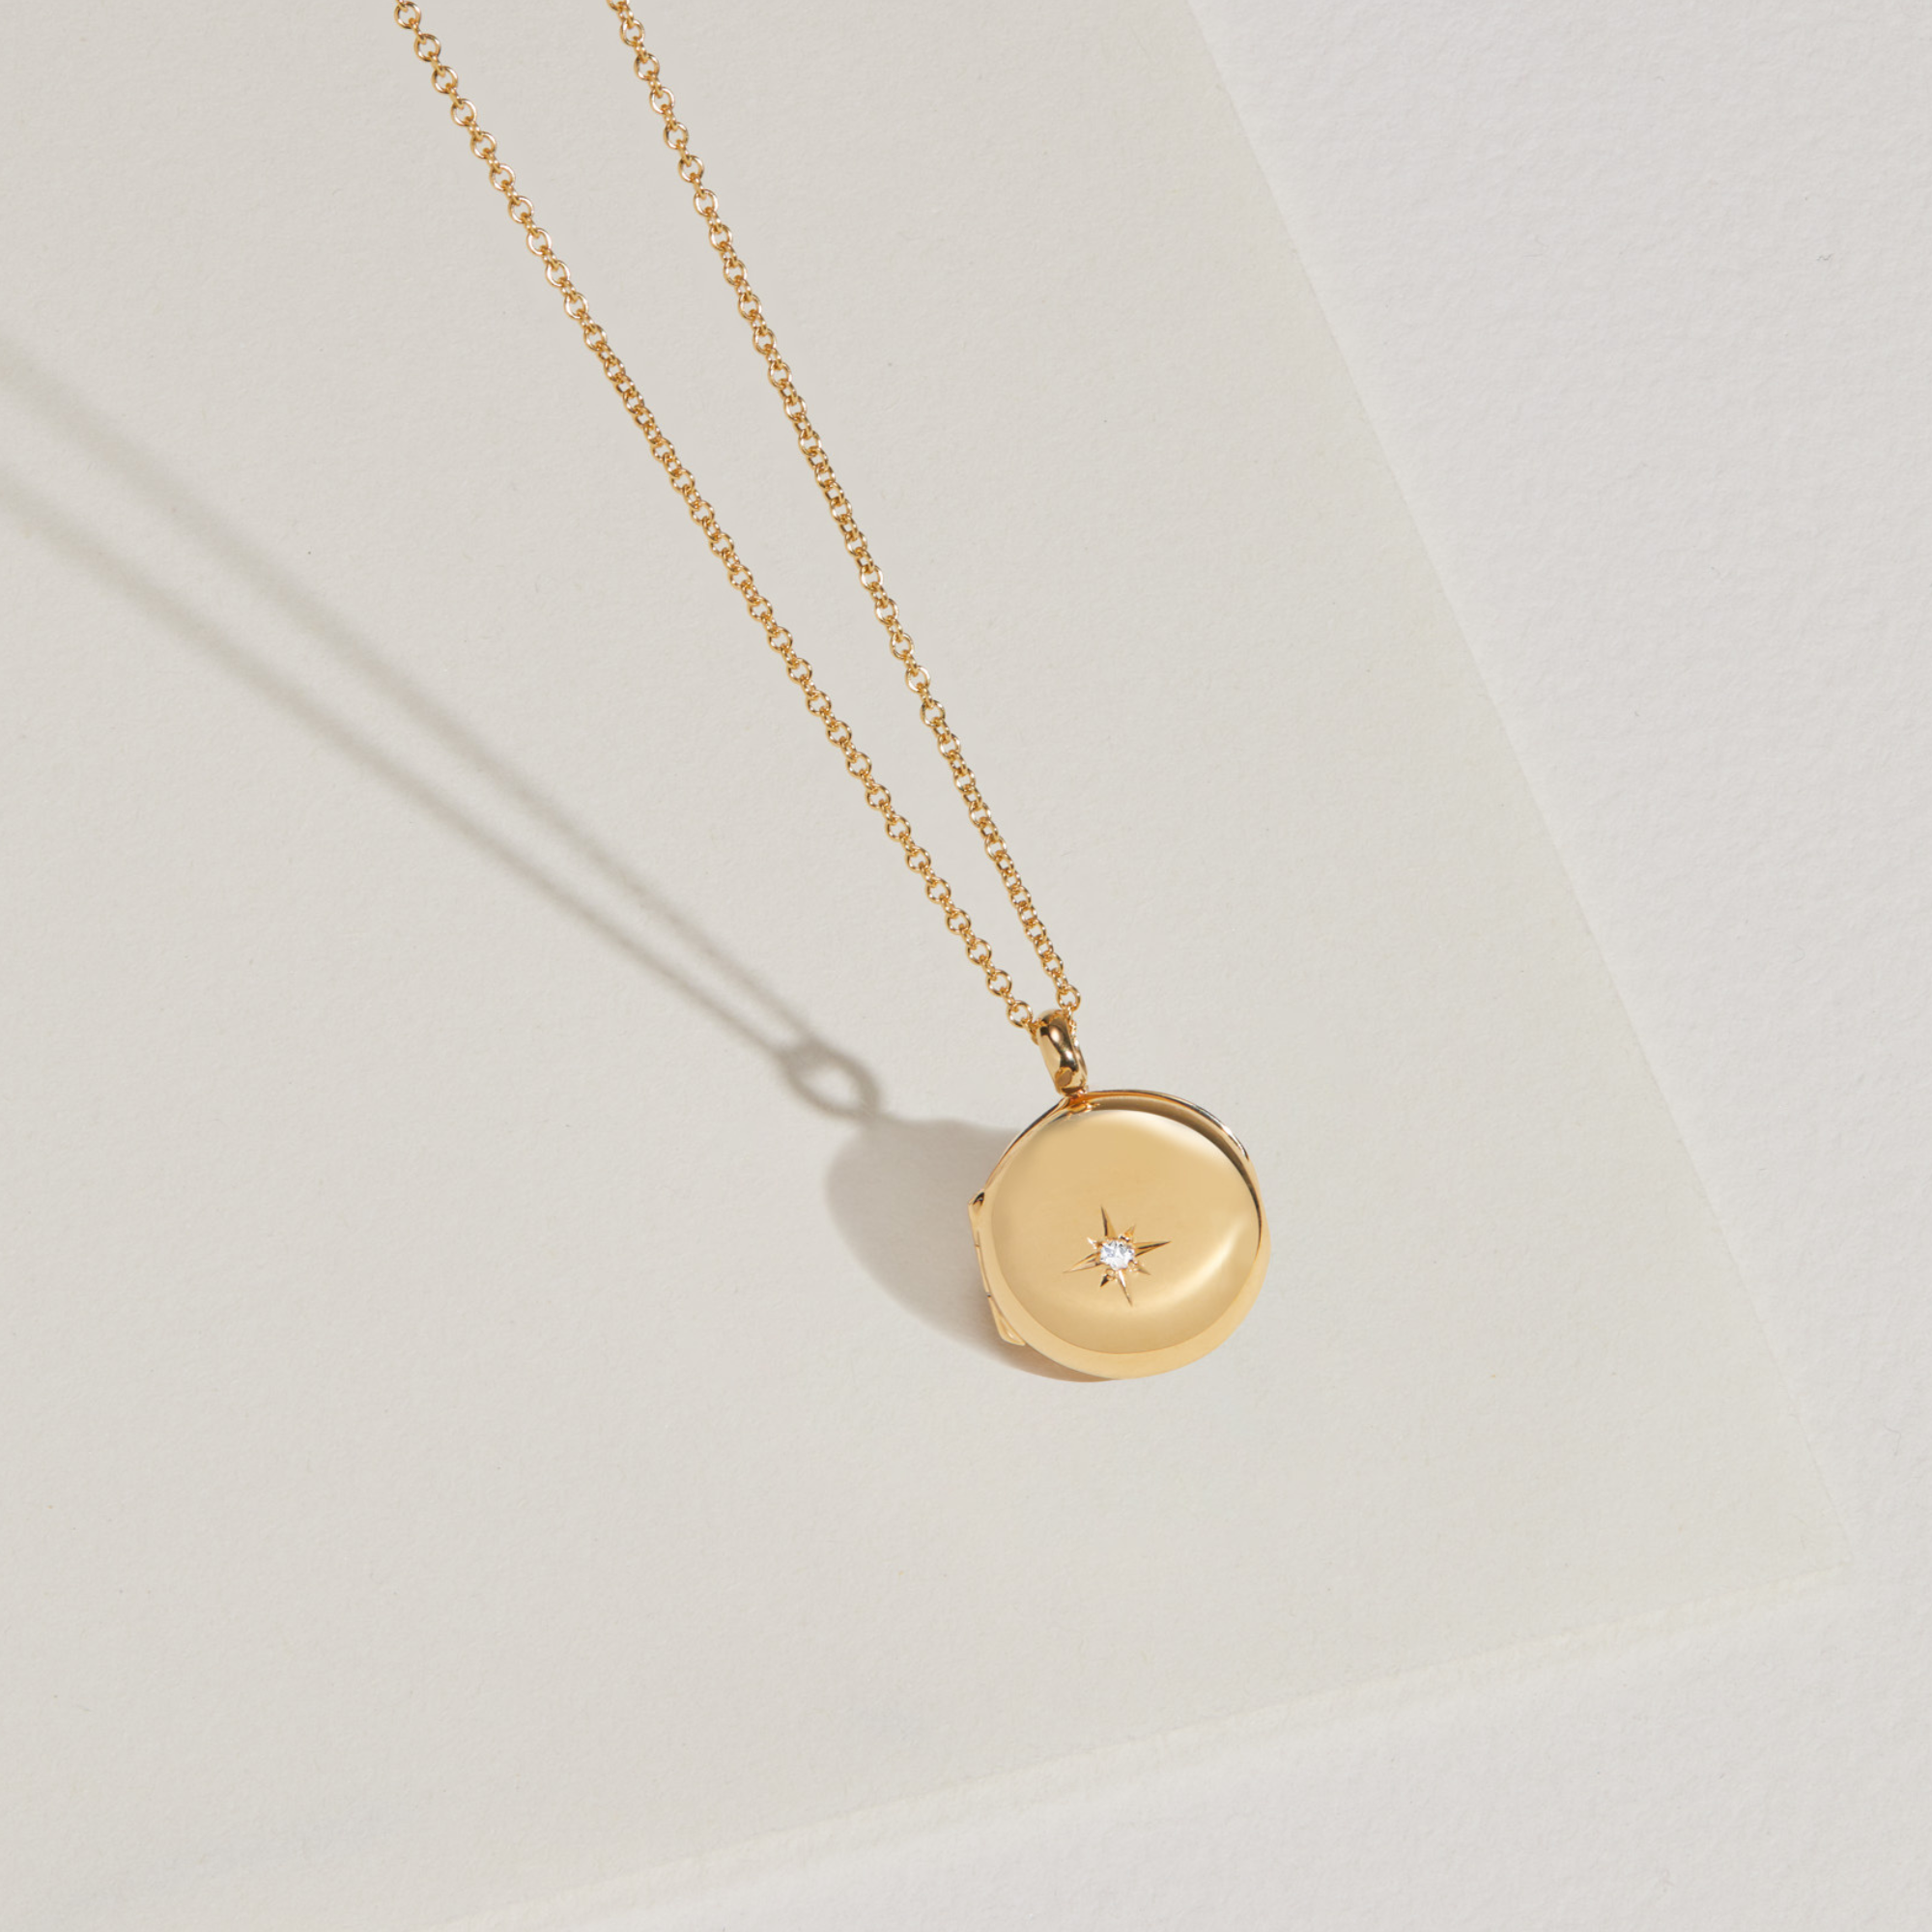 Gold small round diamond locket necklace hanging infront of a paper surface